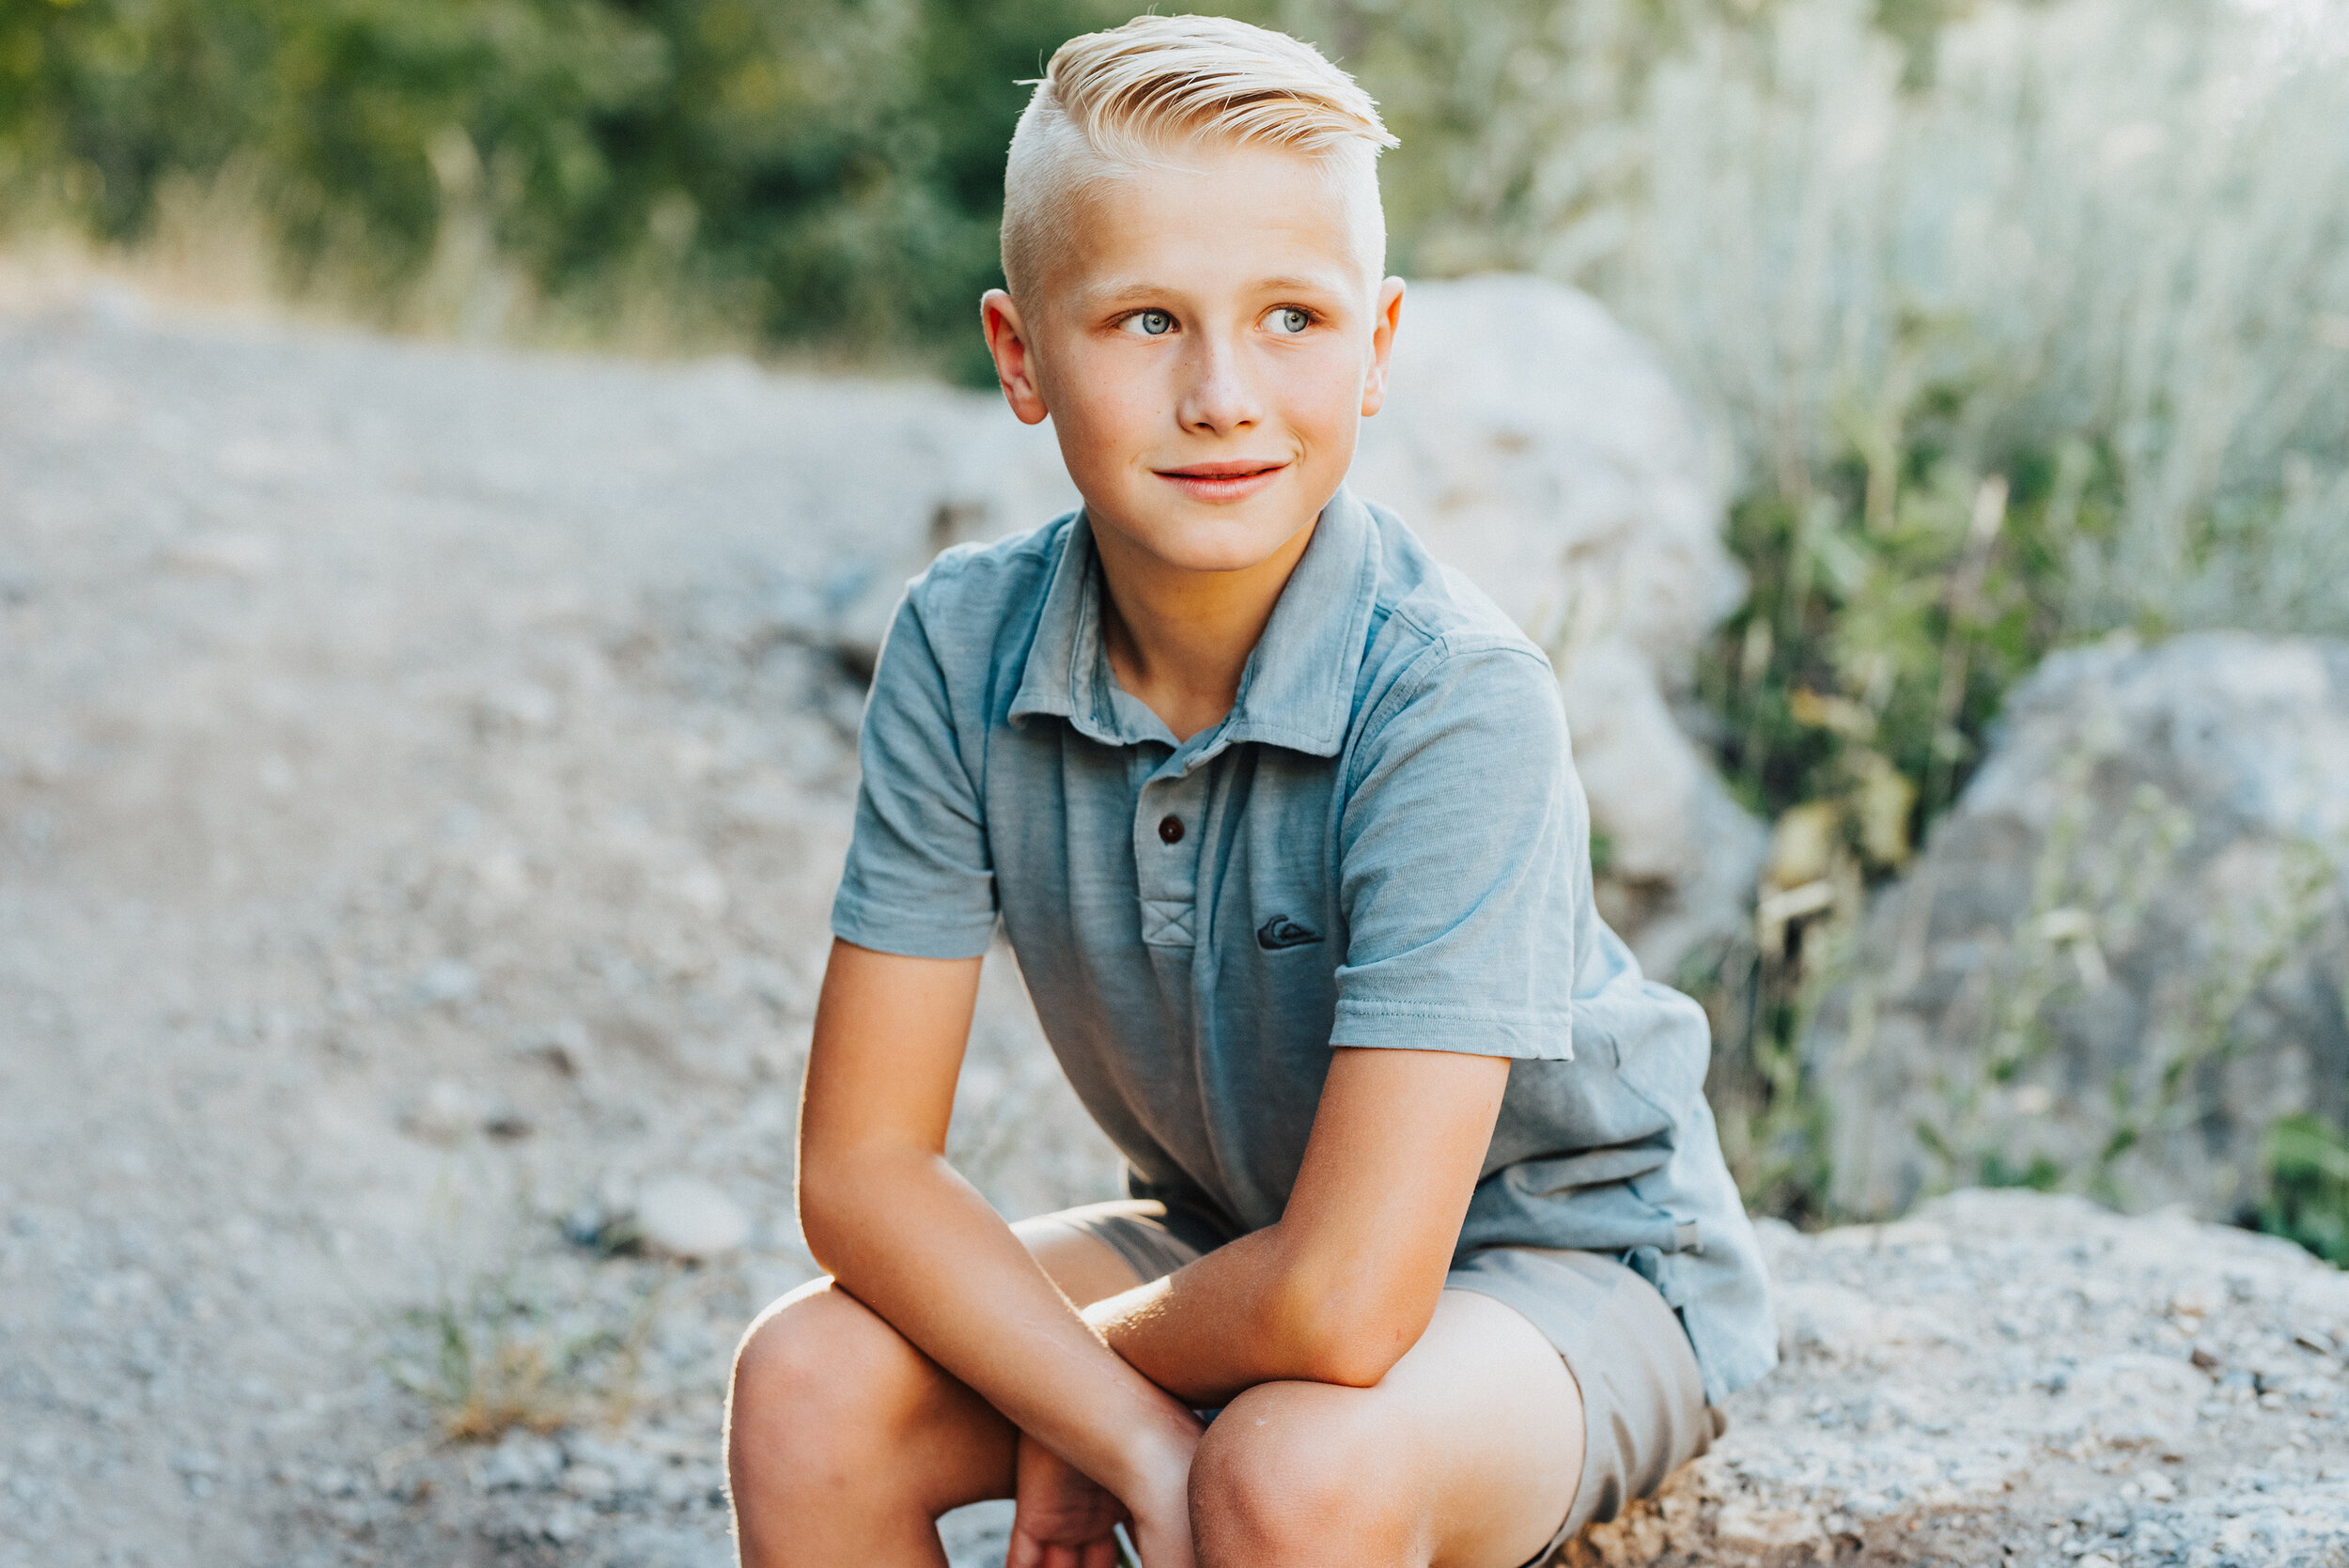 A handsome blue-eyed boy looks off into the distance while sitting casually on a rock in Providence Canyon, UT. Soft outdoor setting casual sitting blonde hair and blue eyes crossed arms sitting #providencecanyon #utahphotography #utah #familyphoto #family #familyphotography #familyphotographer #photography #love #familytime #familyphotoshoot #familyportrait #familyfirst #photooftheday